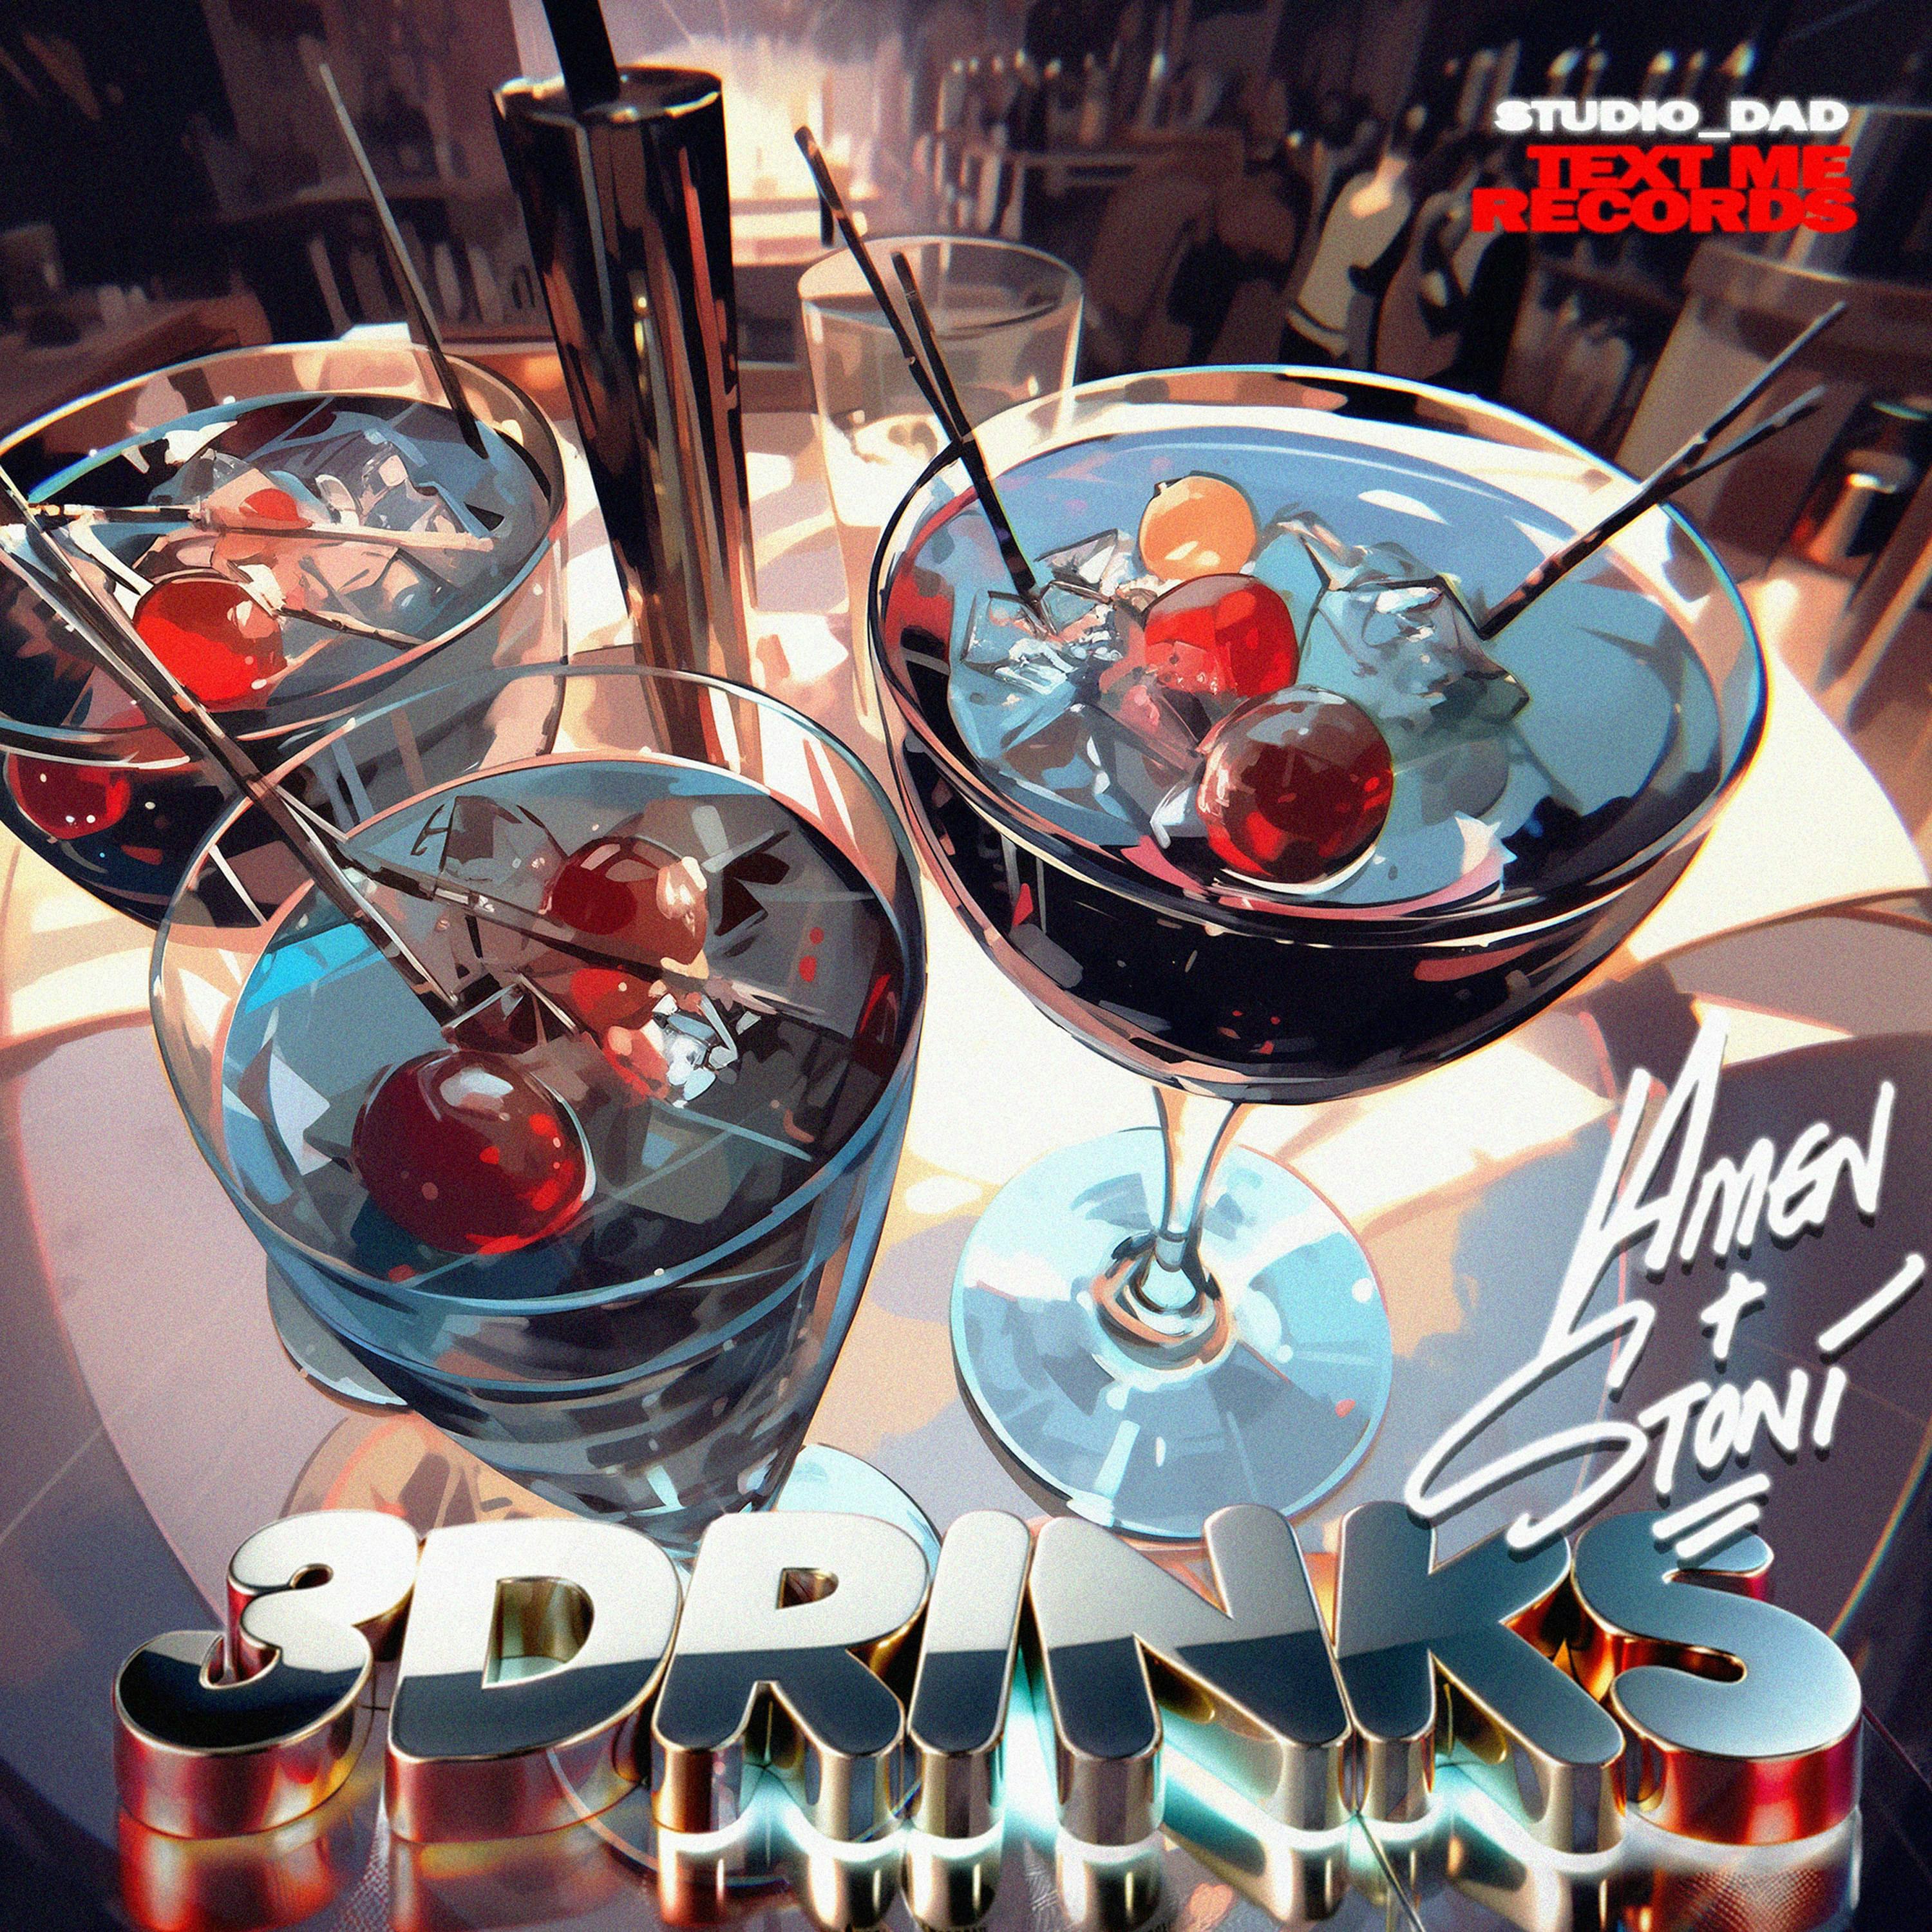 Cover art for 3Drinks - feat. Amen, Stoni by Studio_Dad